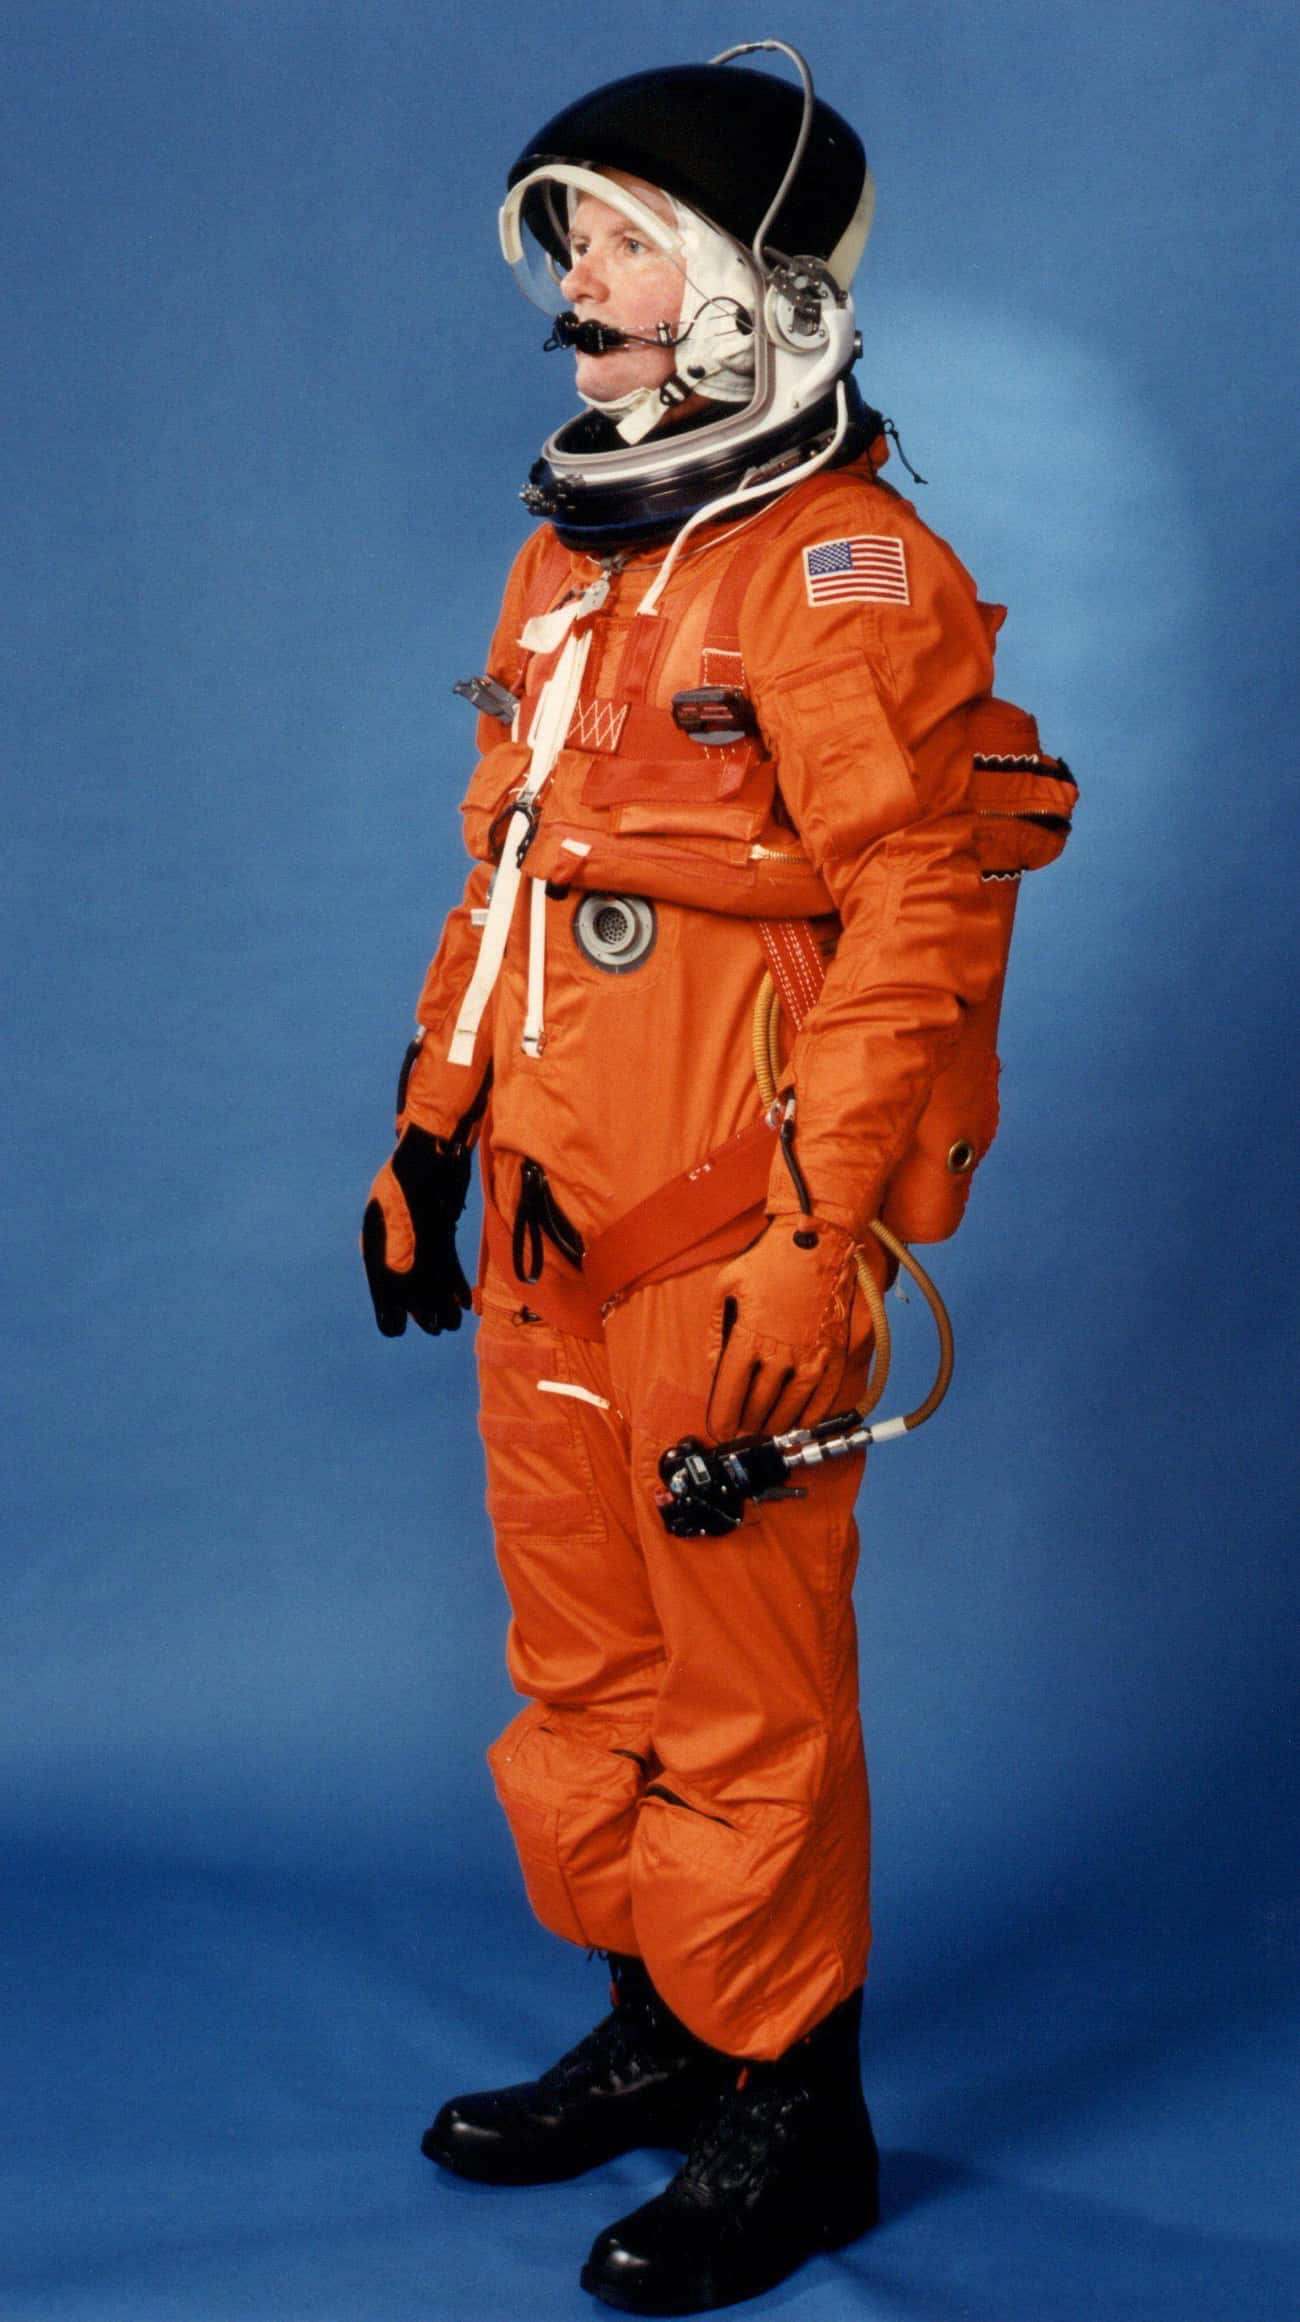 1988-98: Launch Entry Suit, United States